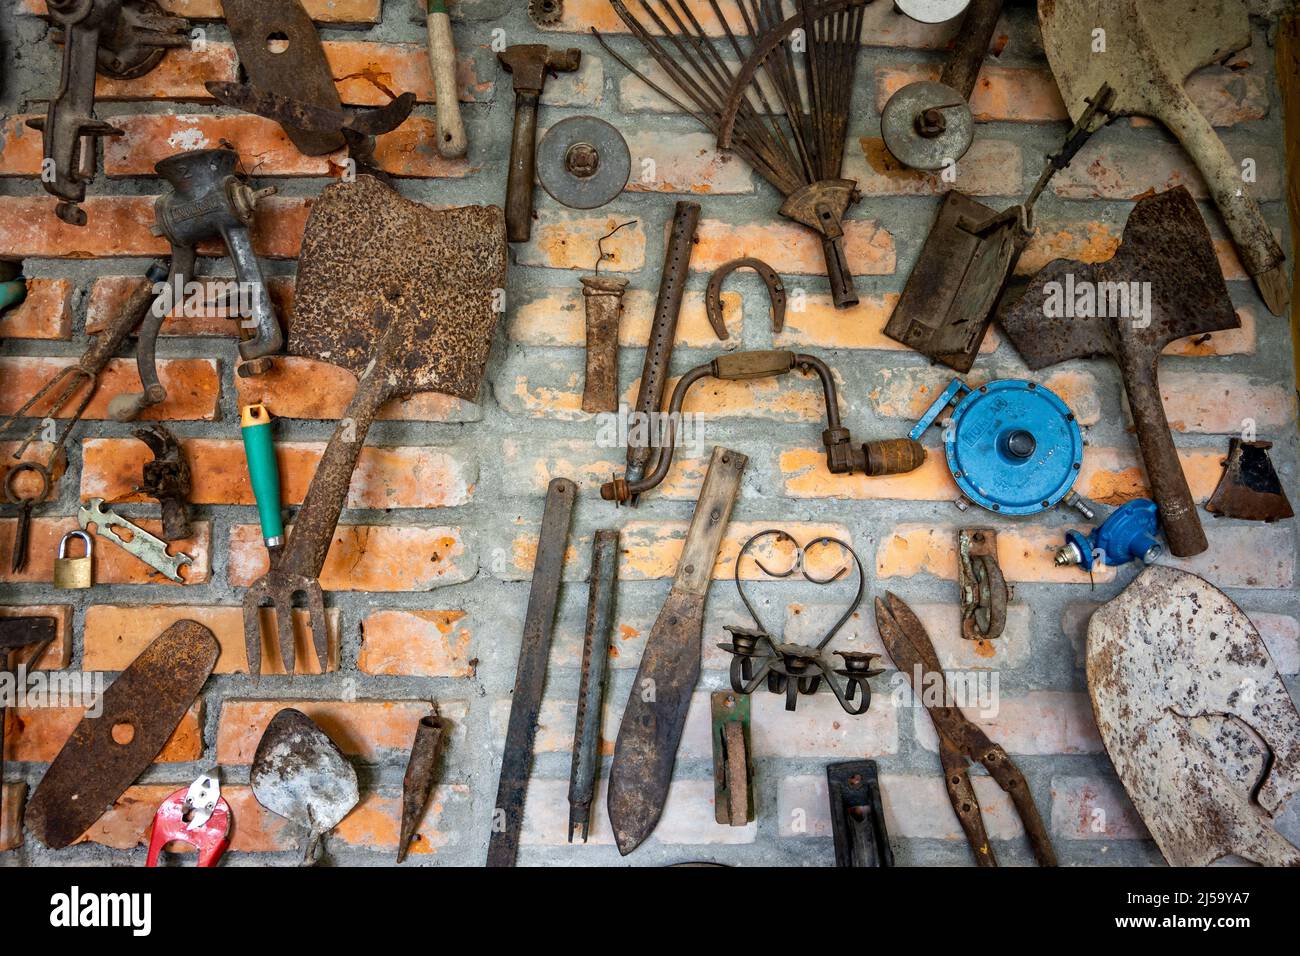 A collection of rusty hand tools mounted on a brick wall. Colombia, South America. Stock Photo